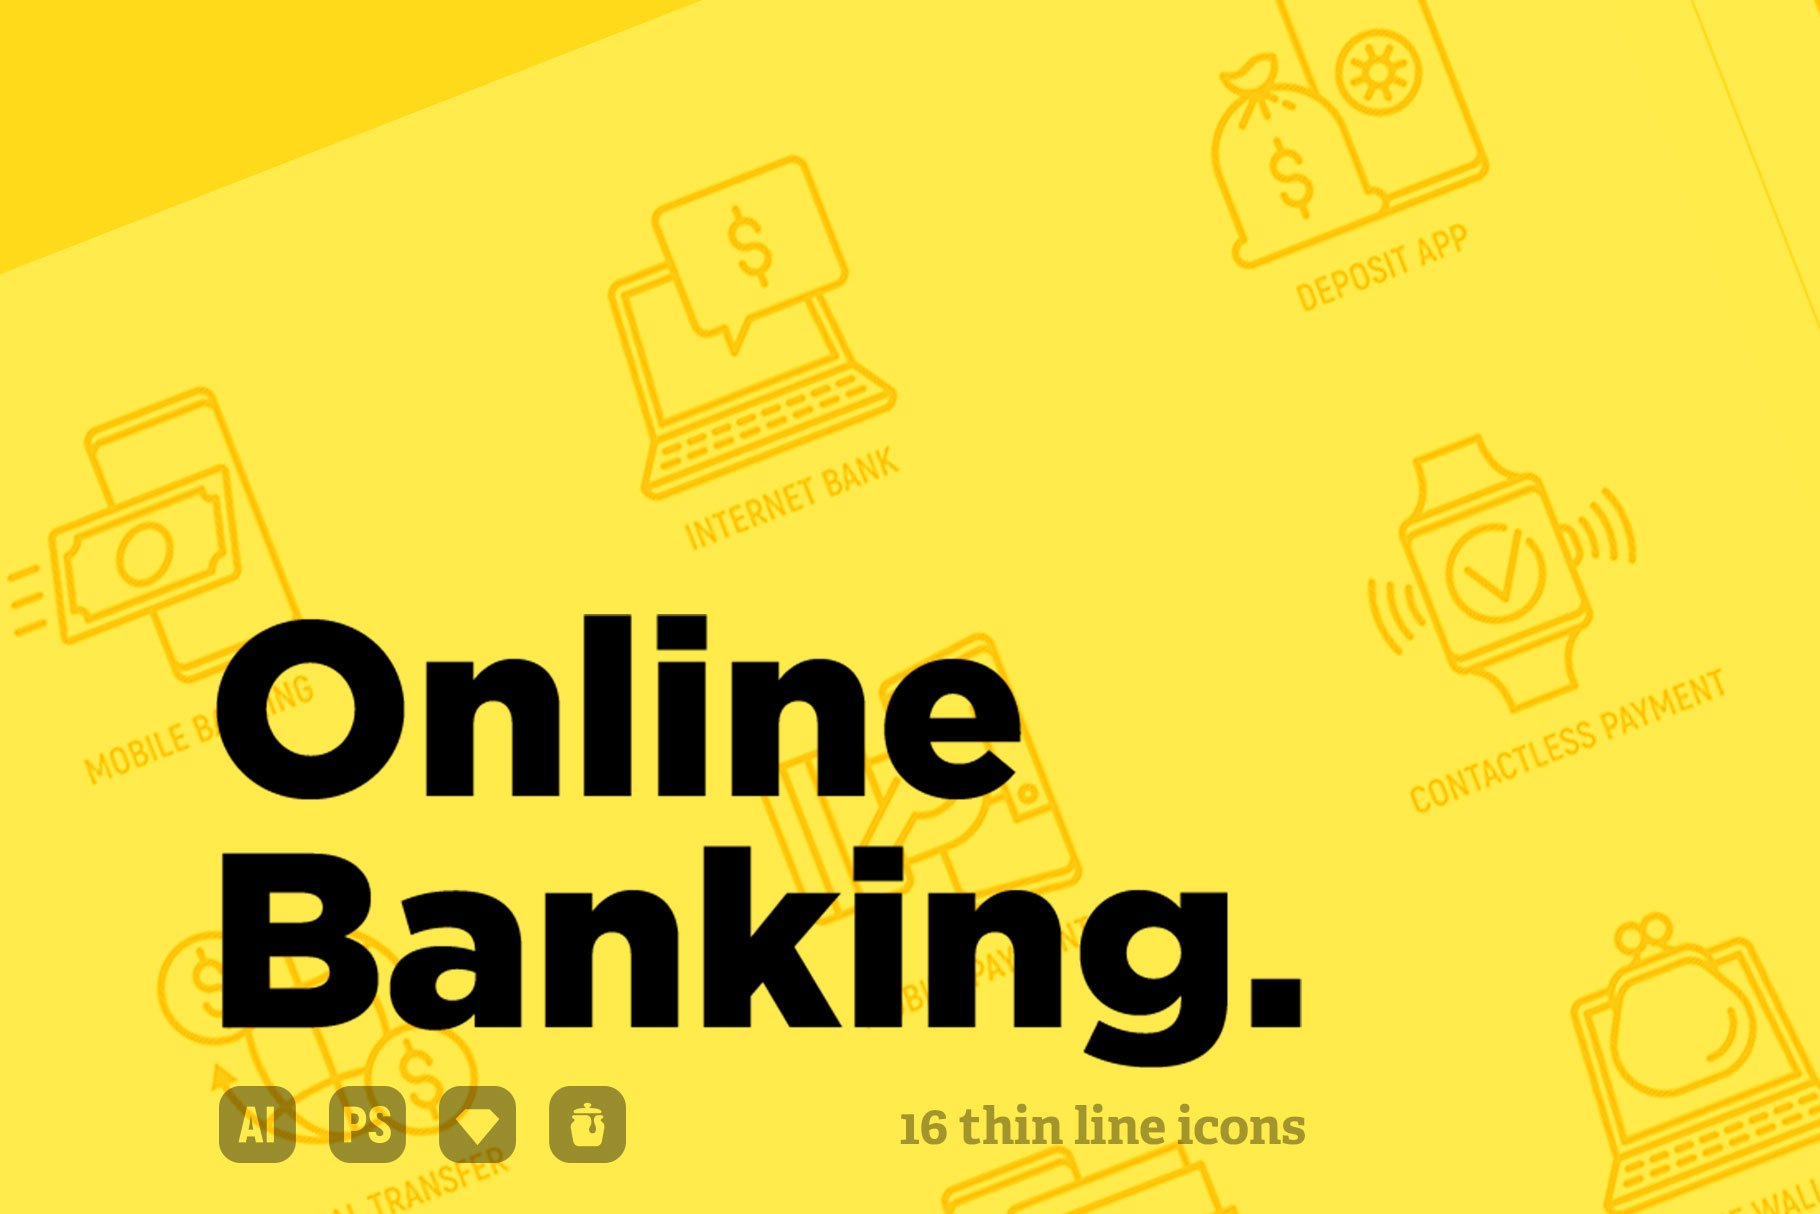 Online Banking | 16 Thin Line Icons cover image.